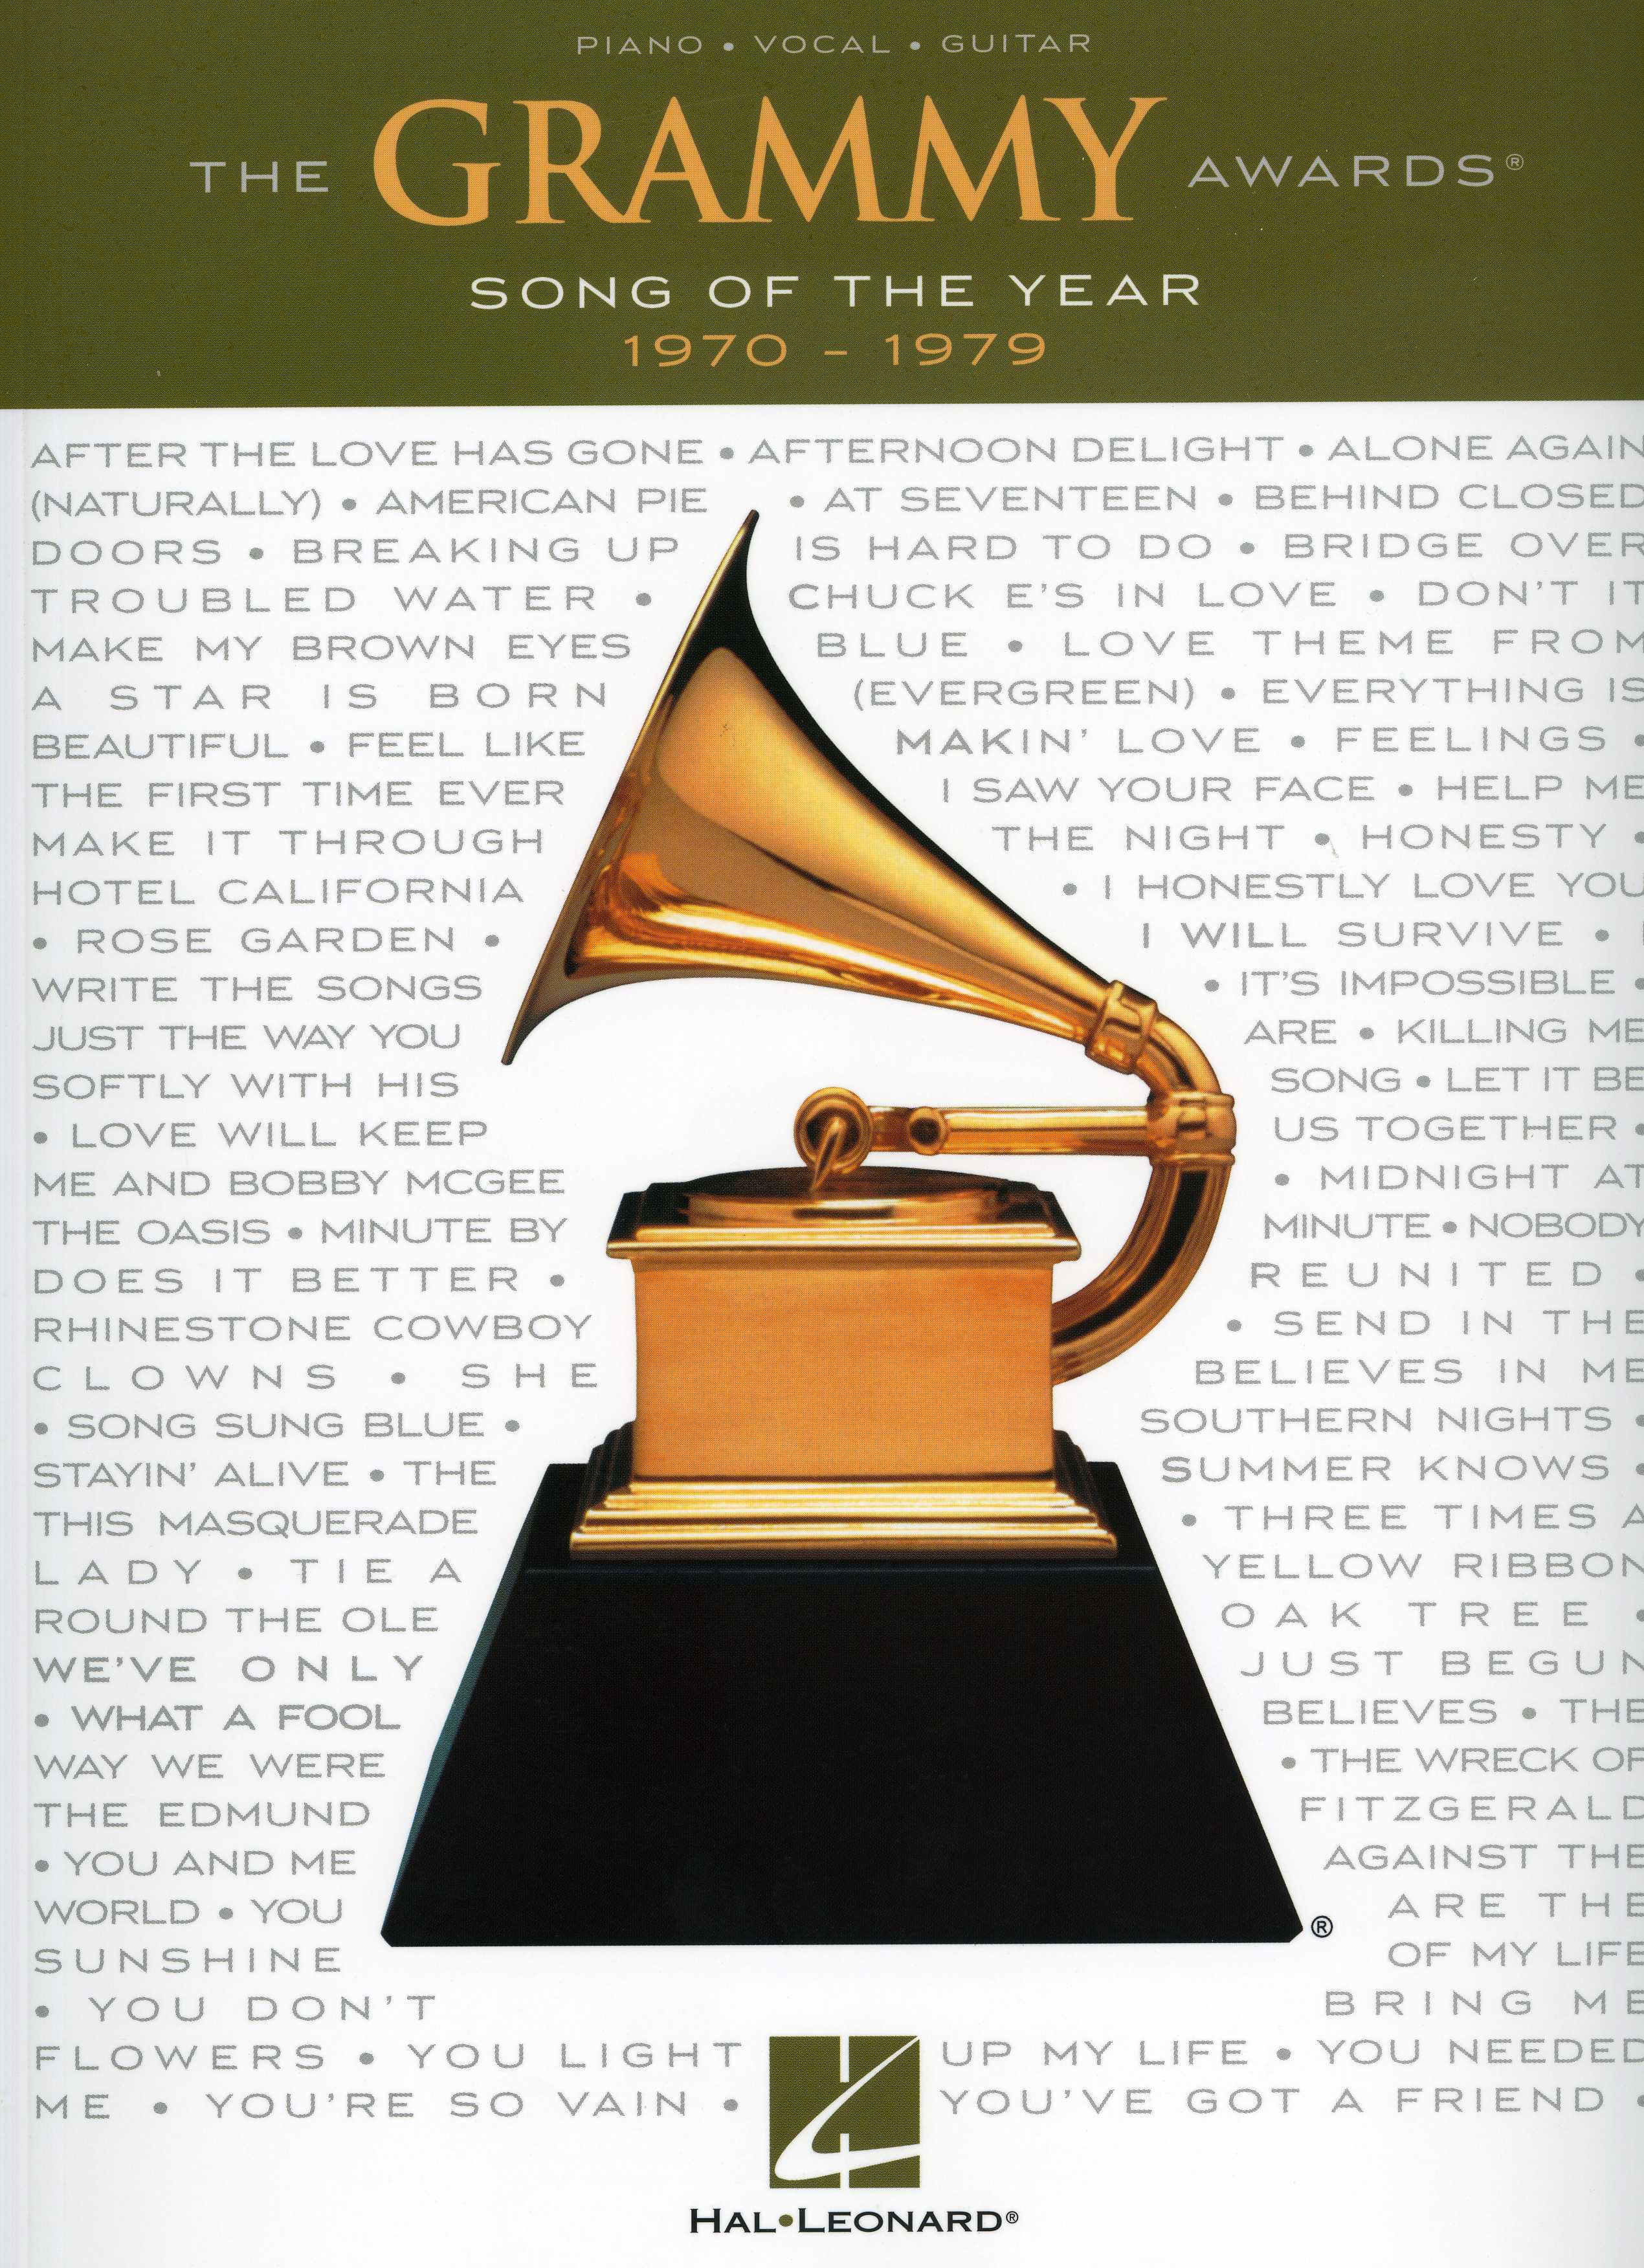 The Grammy Awards Song Of The Year 1970 - 1979